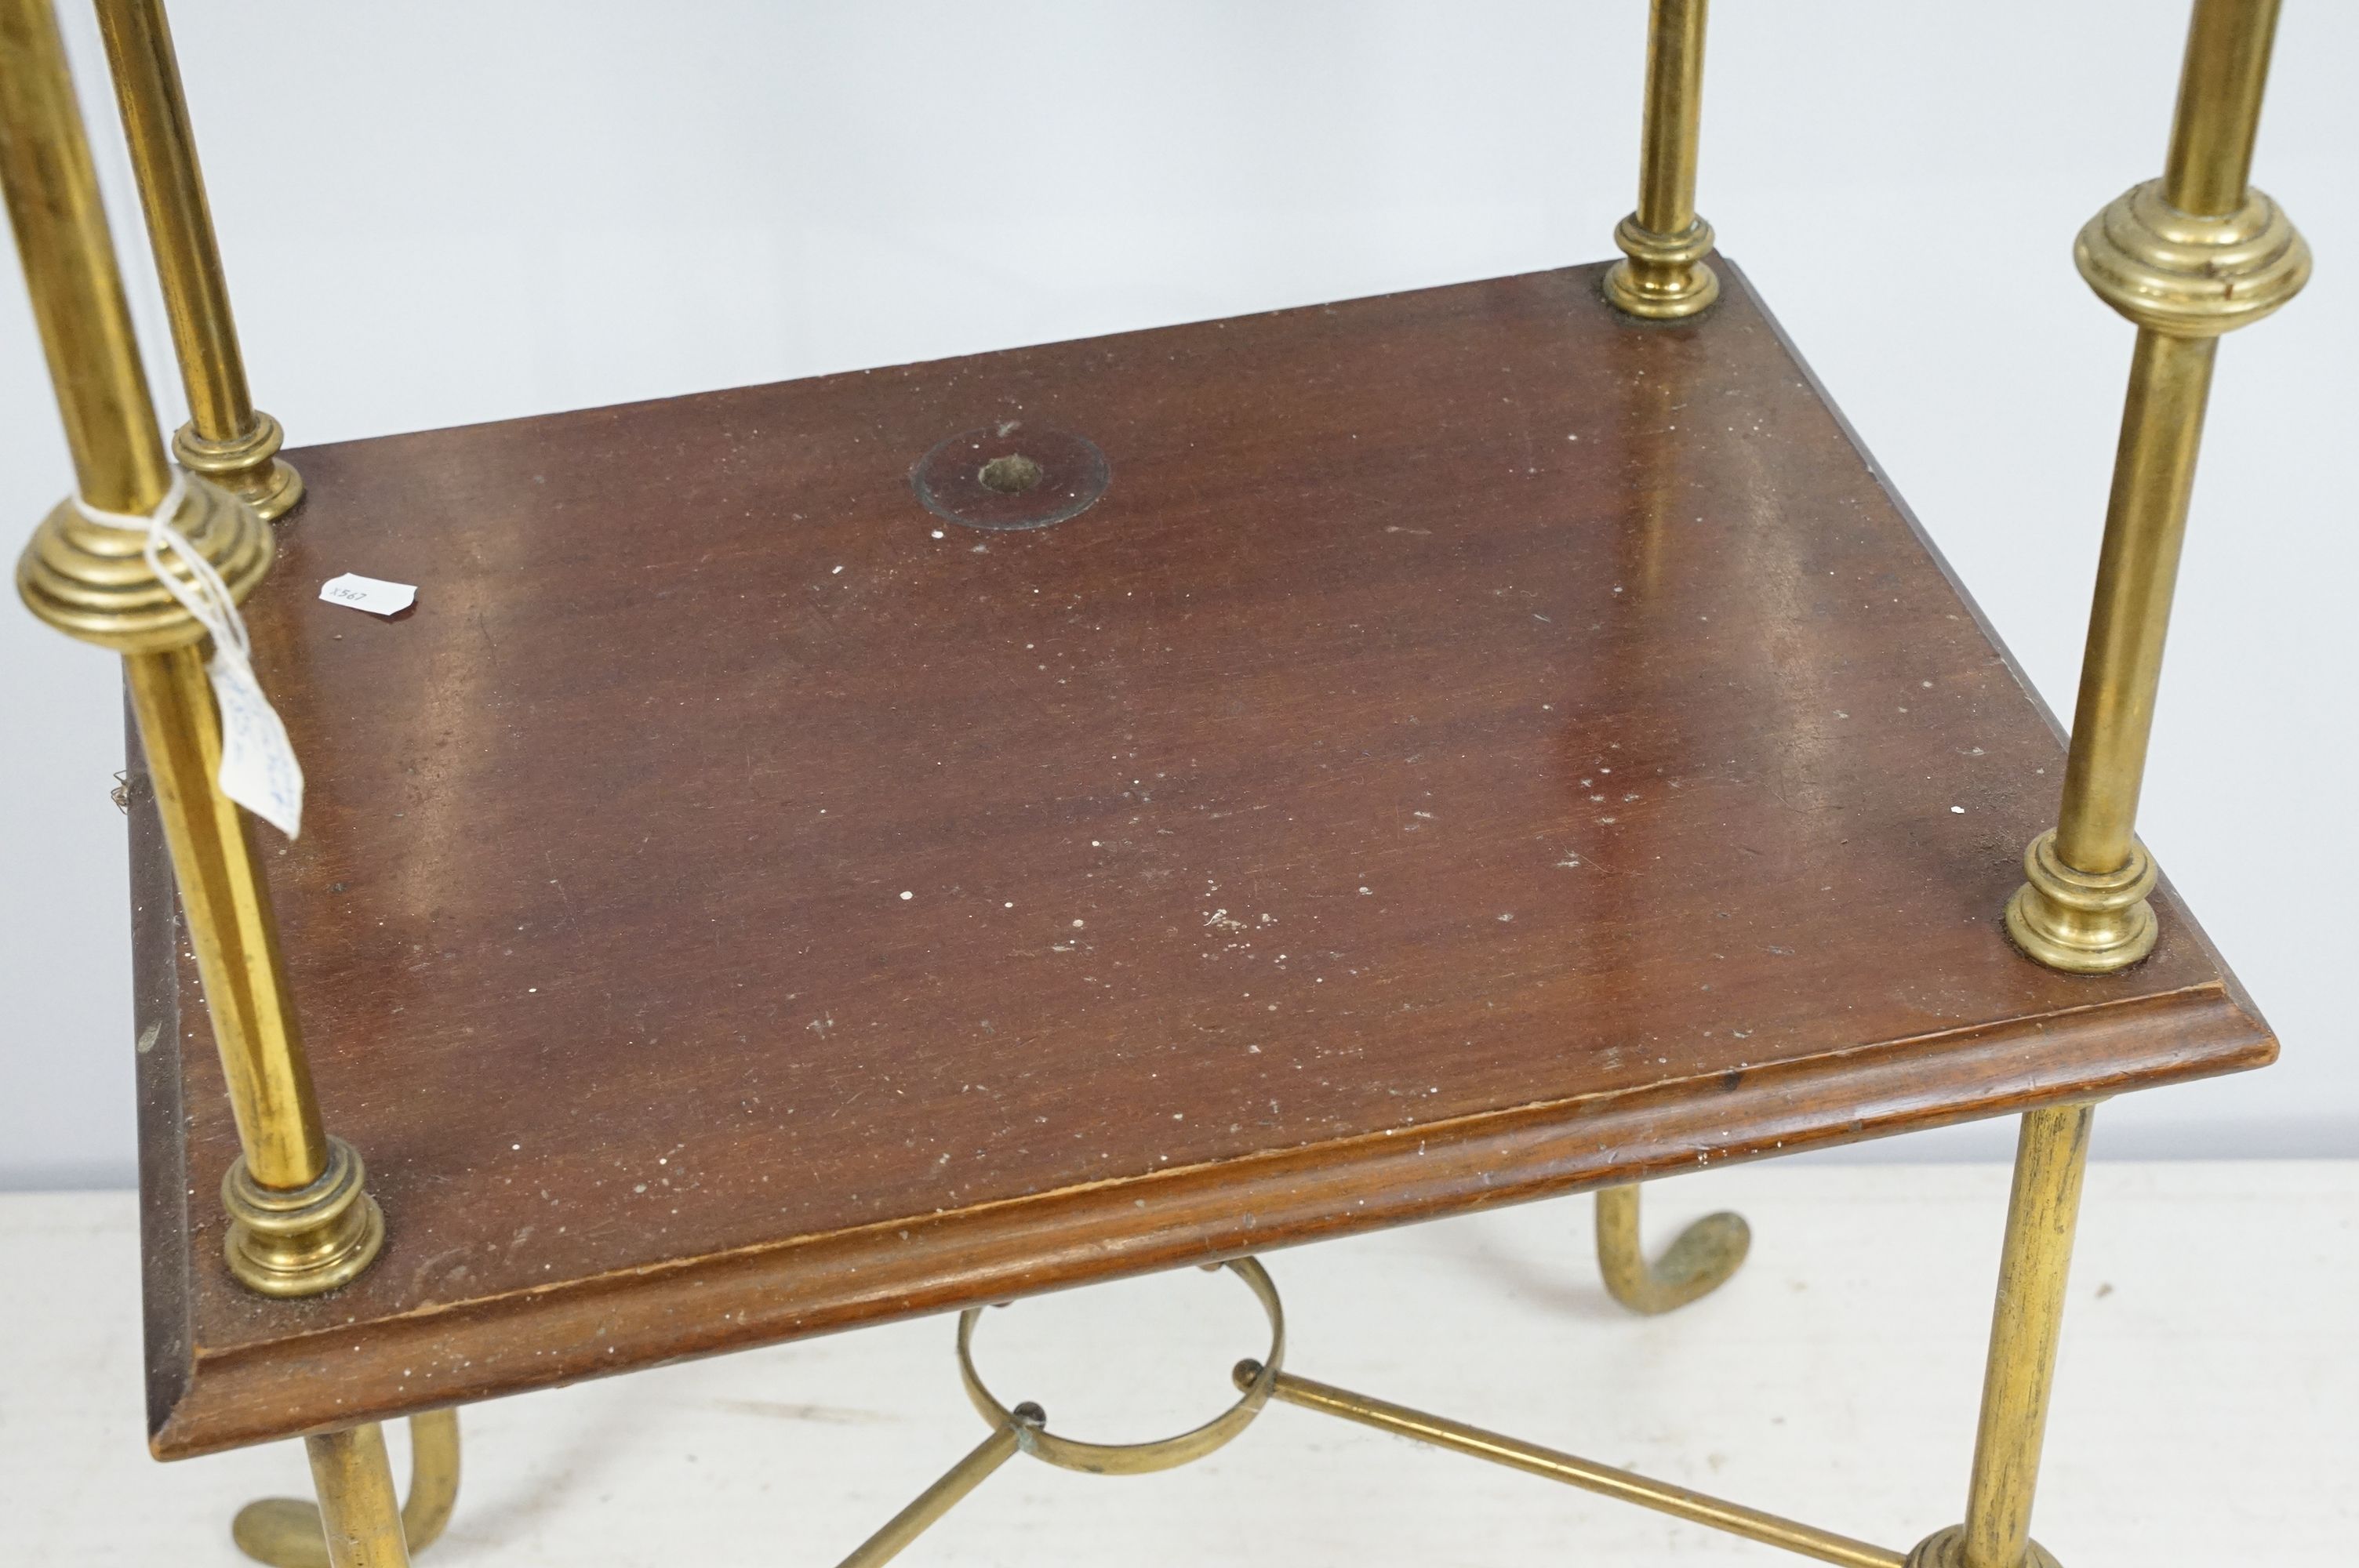 Mahogany two tier table with brass supports and x-stretcher, 80cm high x 45cm wide x 36cm deep - Image 3 of 6